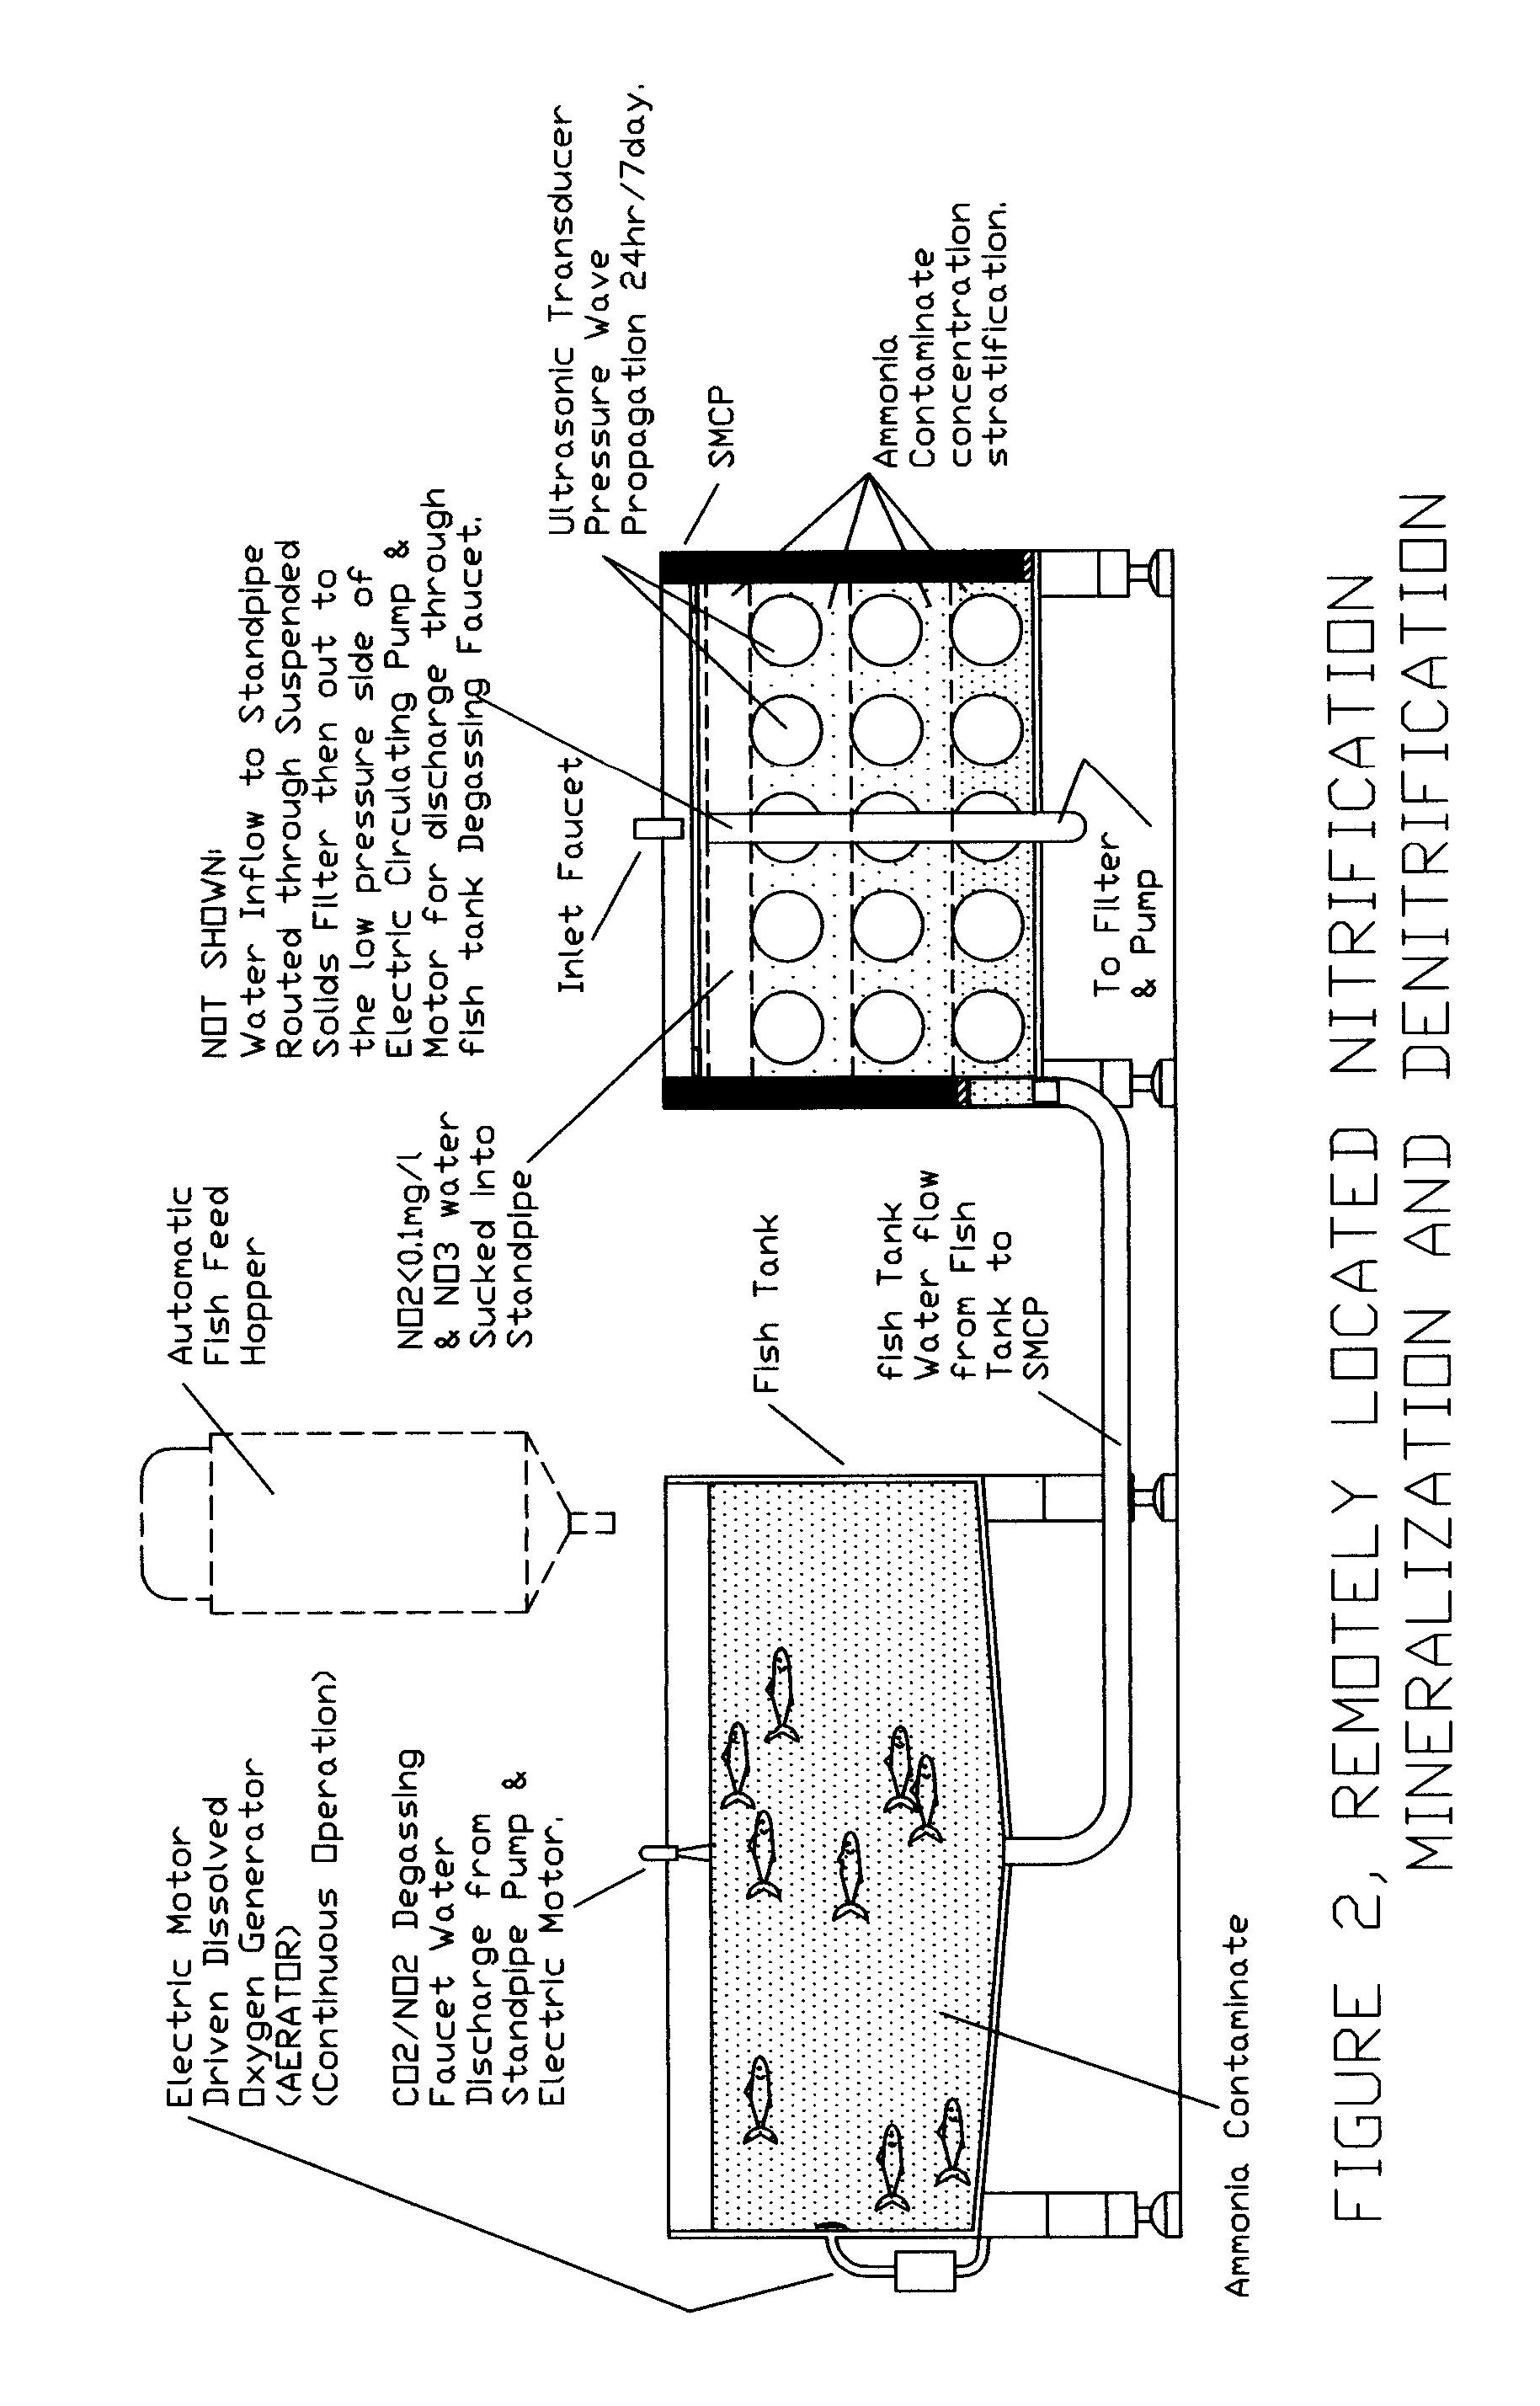 Method And Device For Removal Of Ammonia And Other Contaminants From Recirculating Aquaculture Tanks